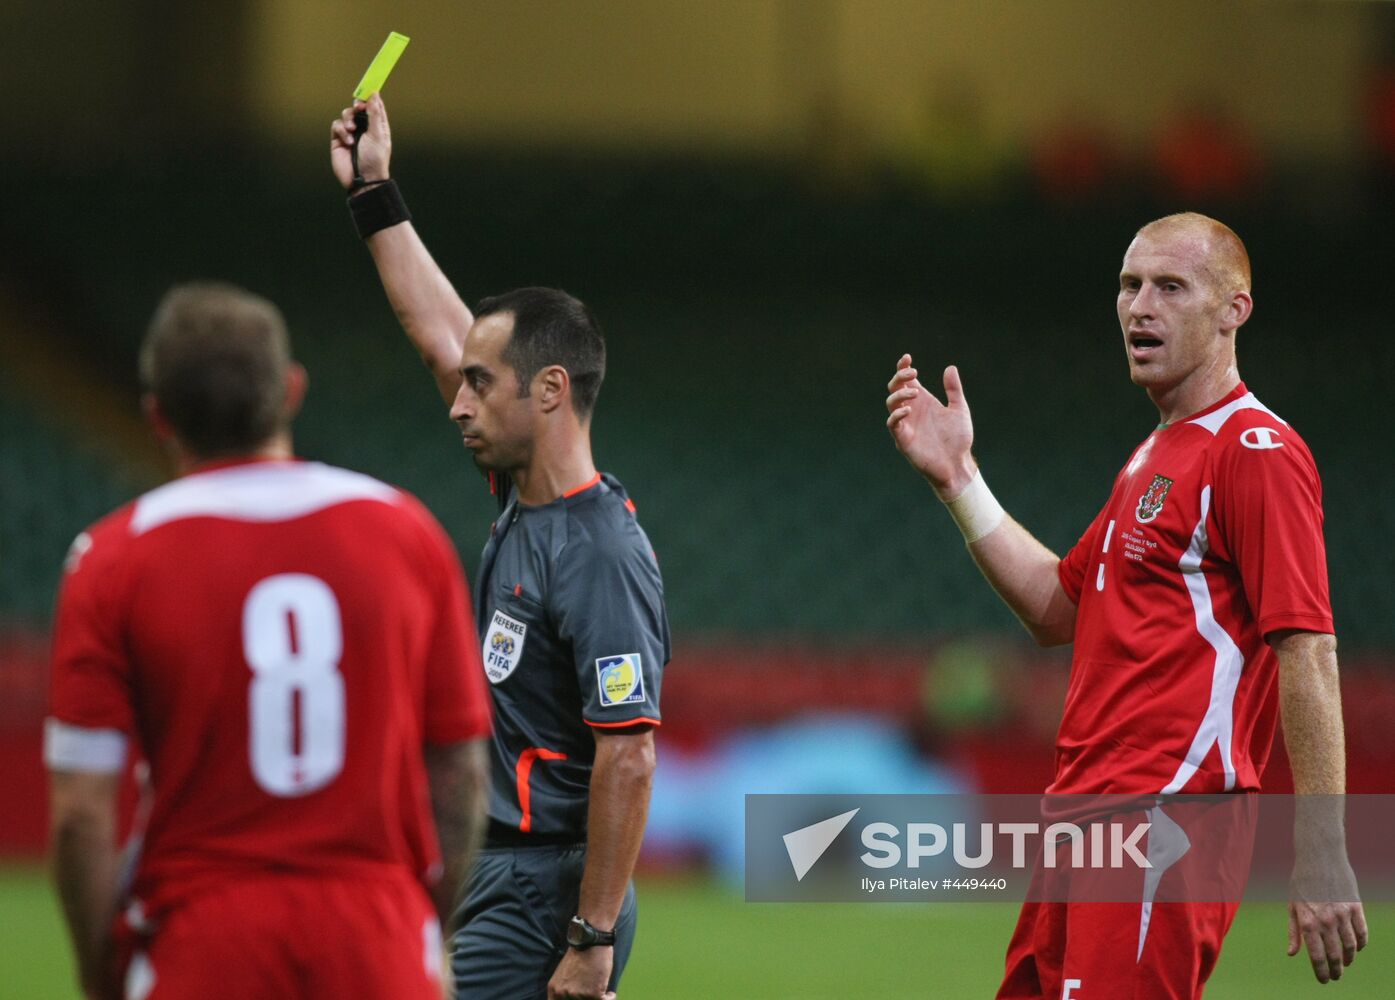 Football. FIFA World Cup 2010 qualifier. Wales vs Russia. 1-3